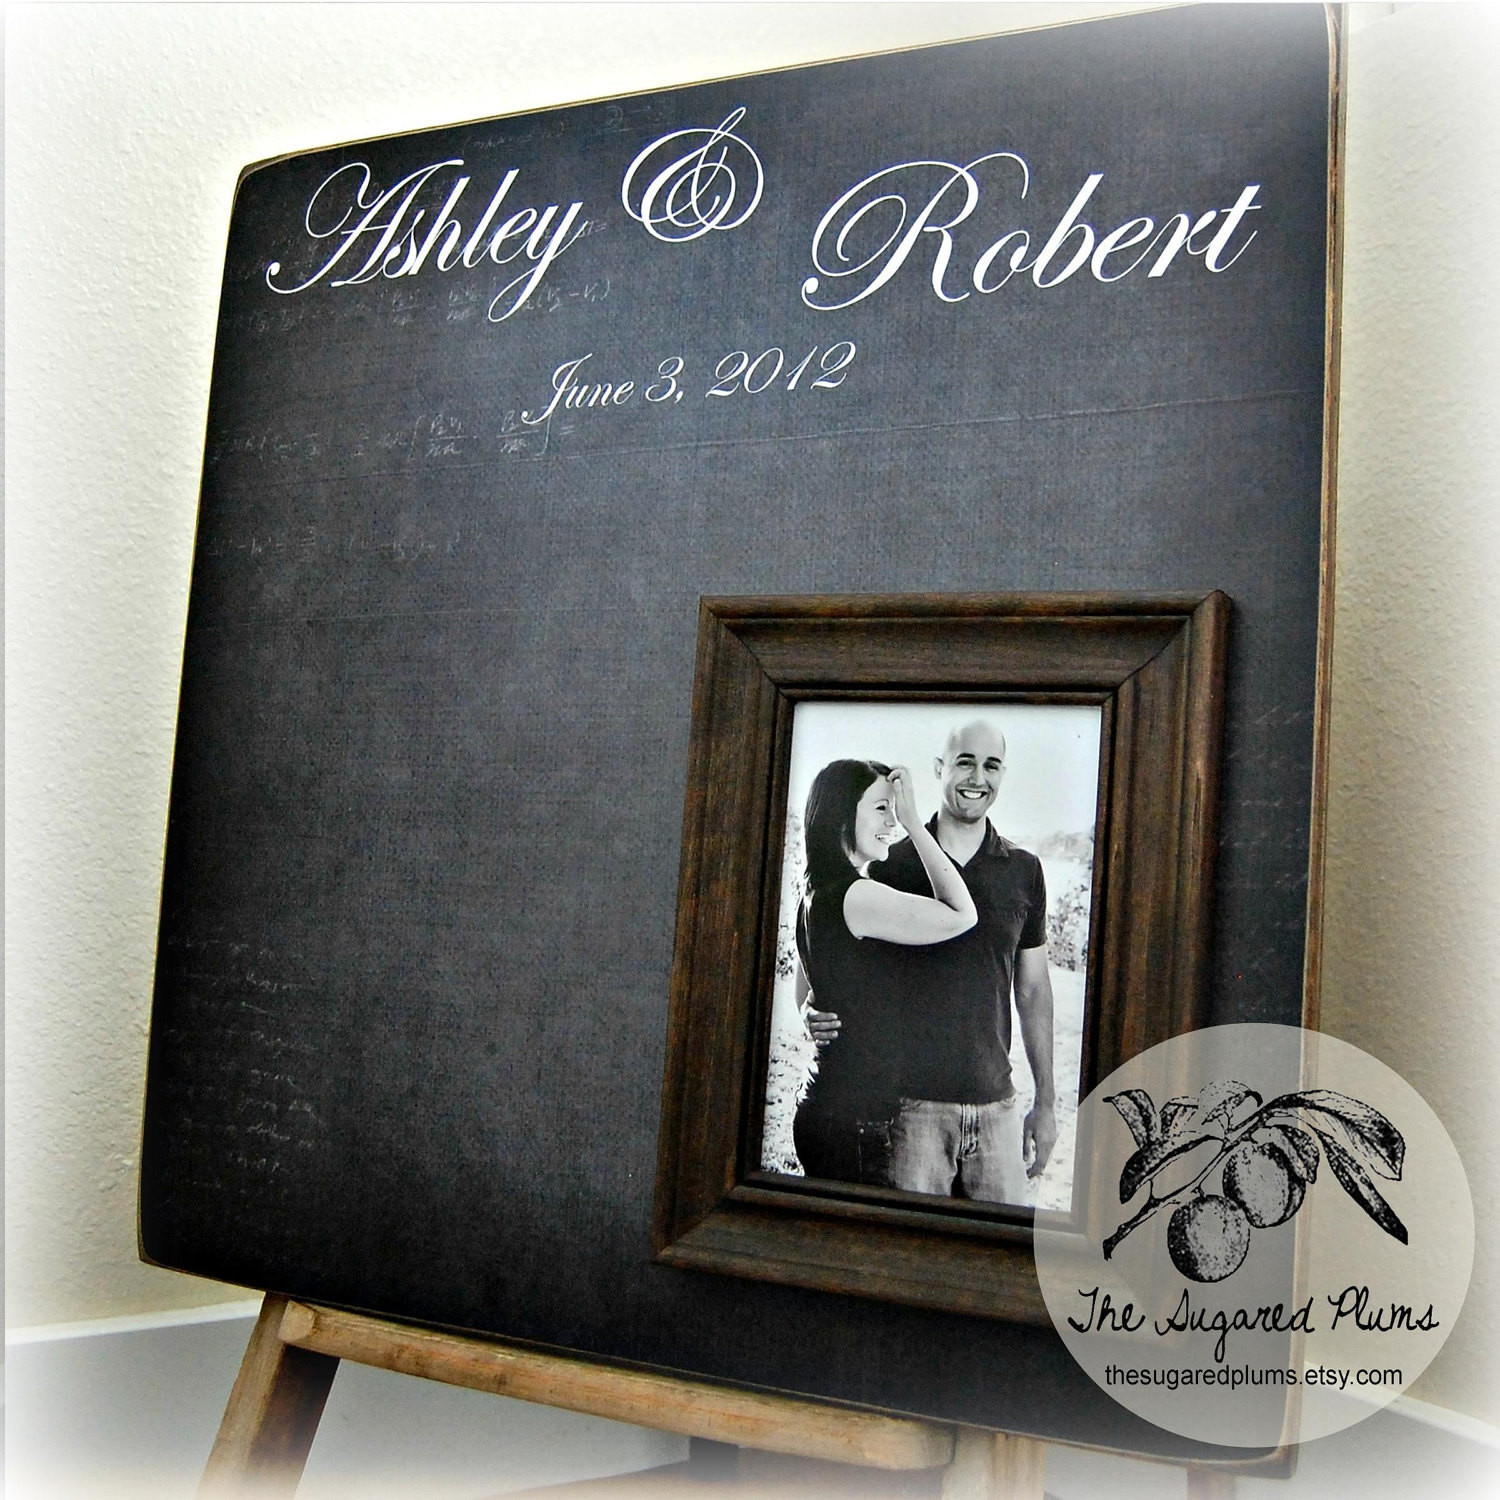 Wedding Guest Book Picture Frames
 Guest Book Wedding Personalized Picture Frame by